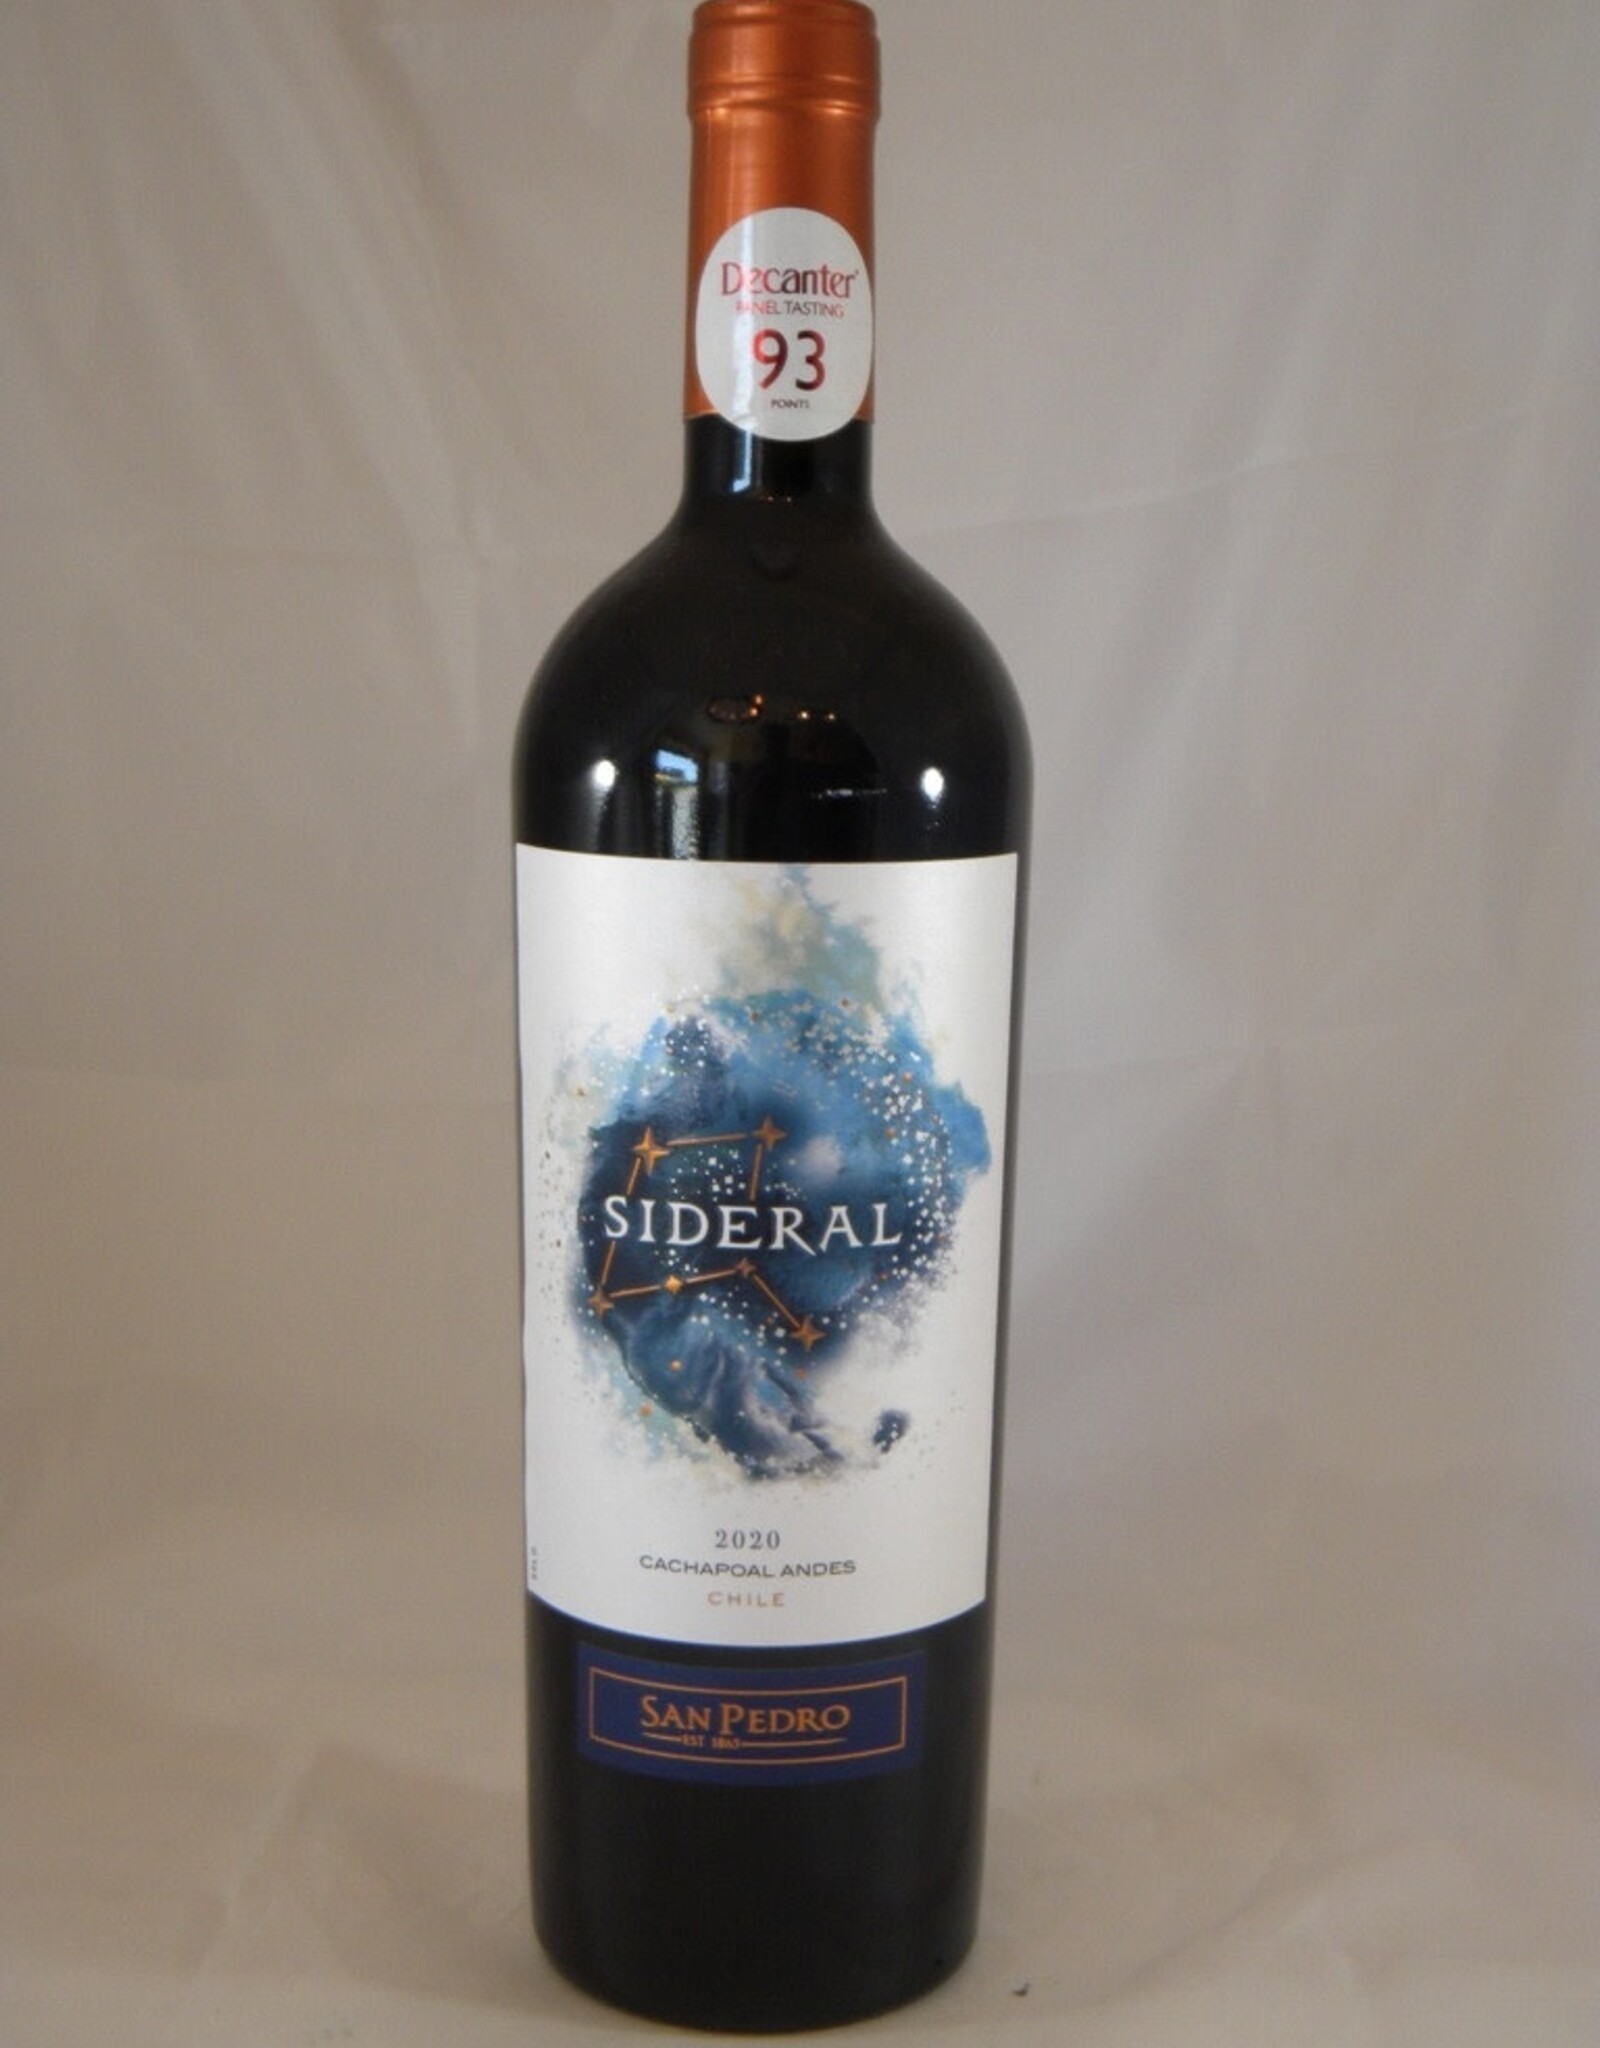 San Pedro Sideral Cachapoal Andes 2020